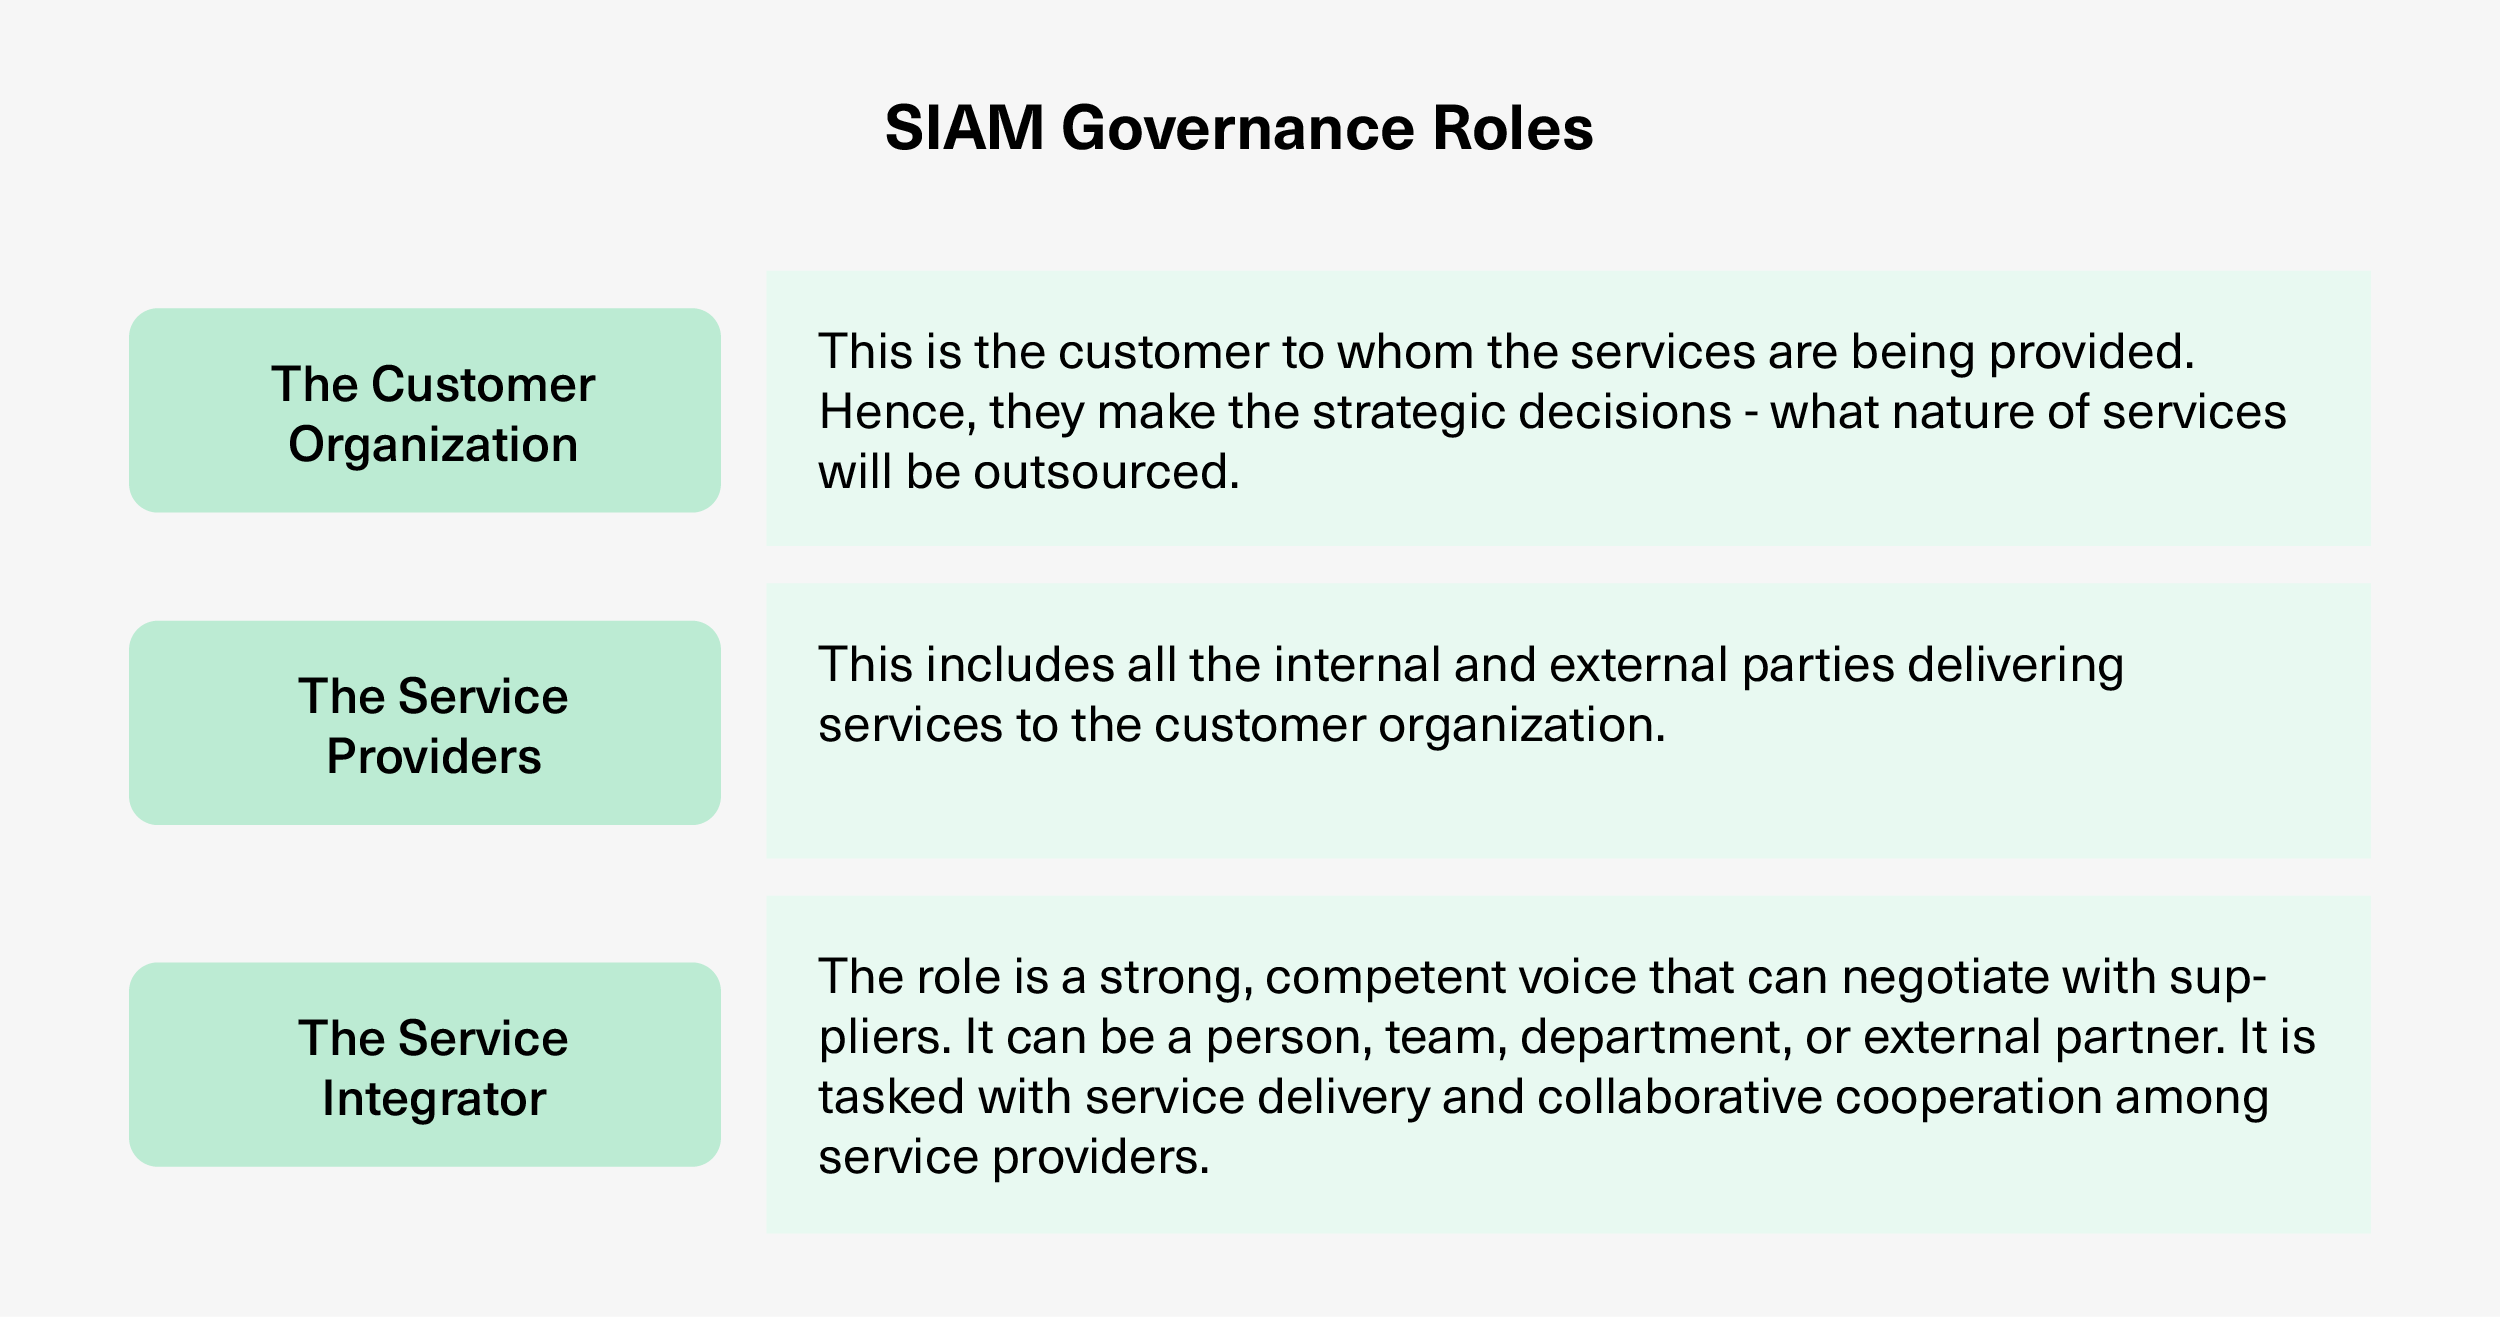 SIAM governance roles table